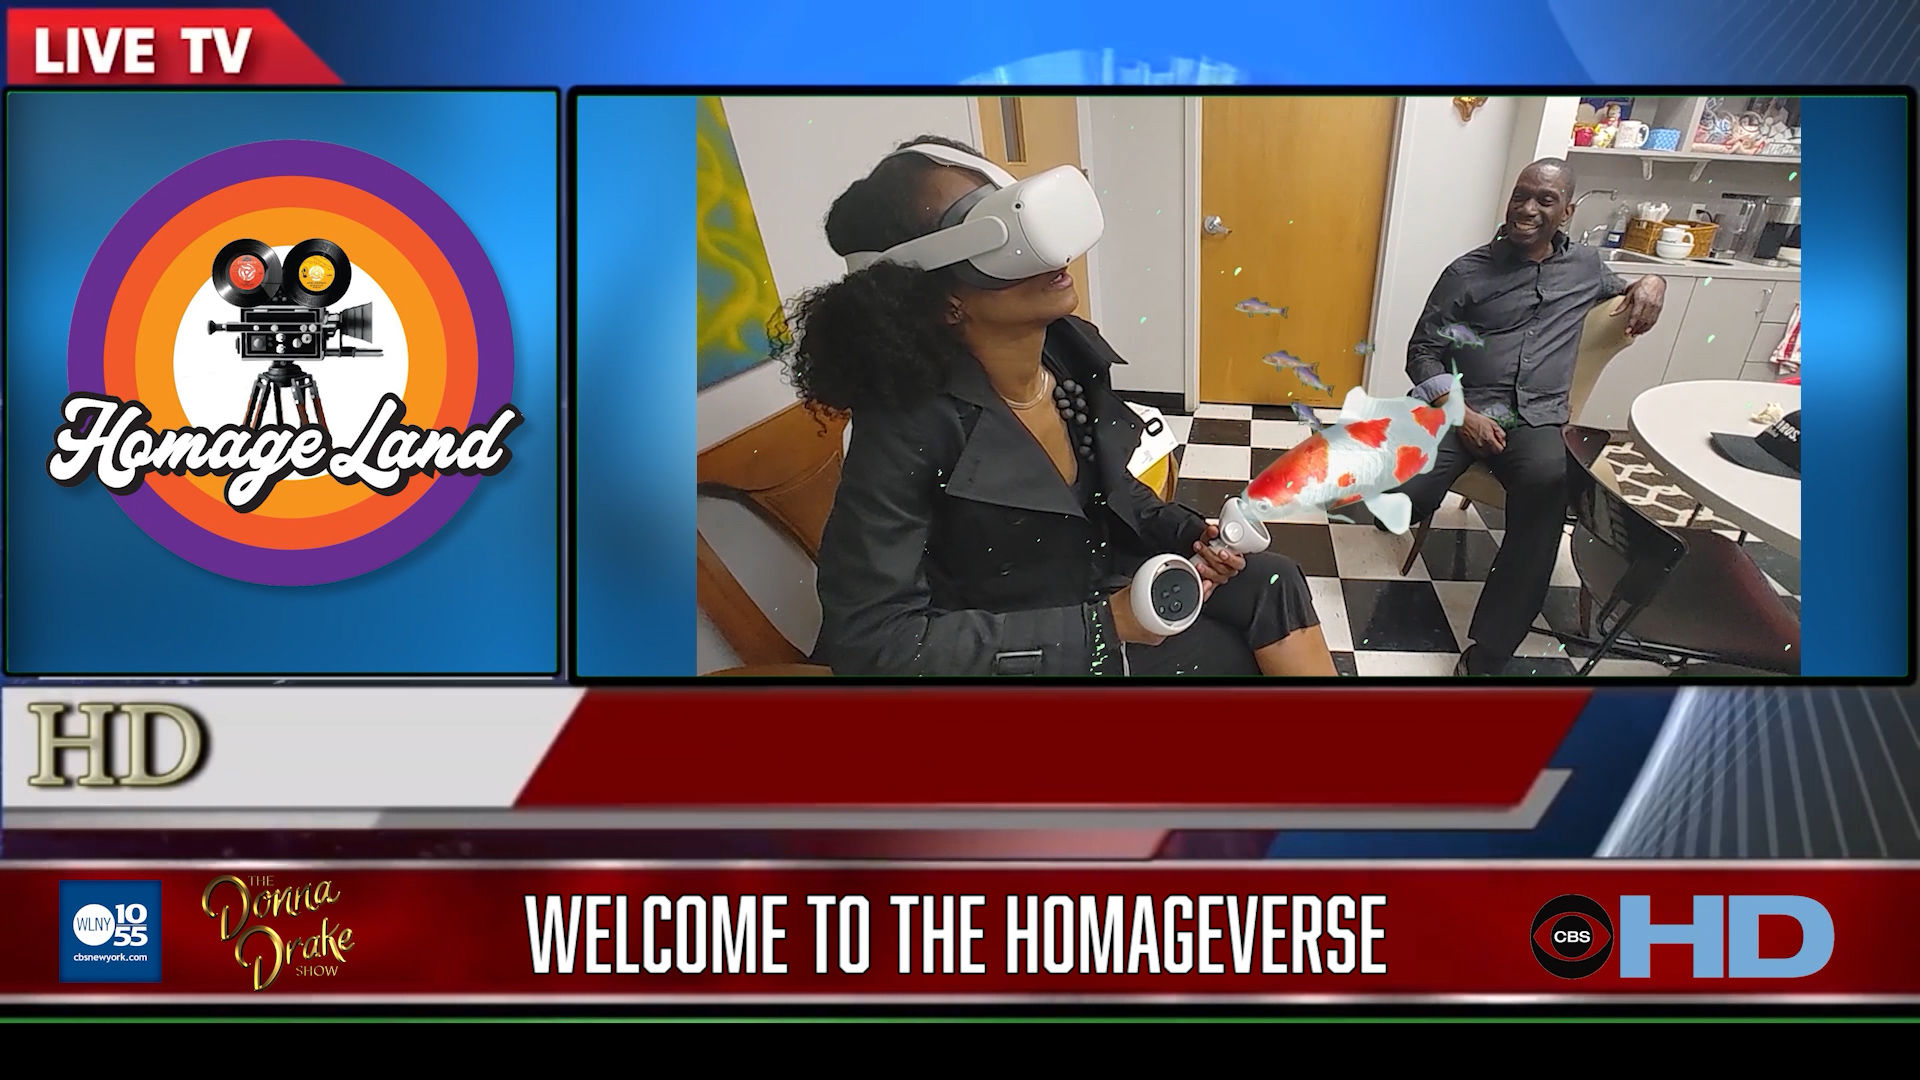 CHOMBA DUNN on The Donna Drake Show + Into The Metaverse